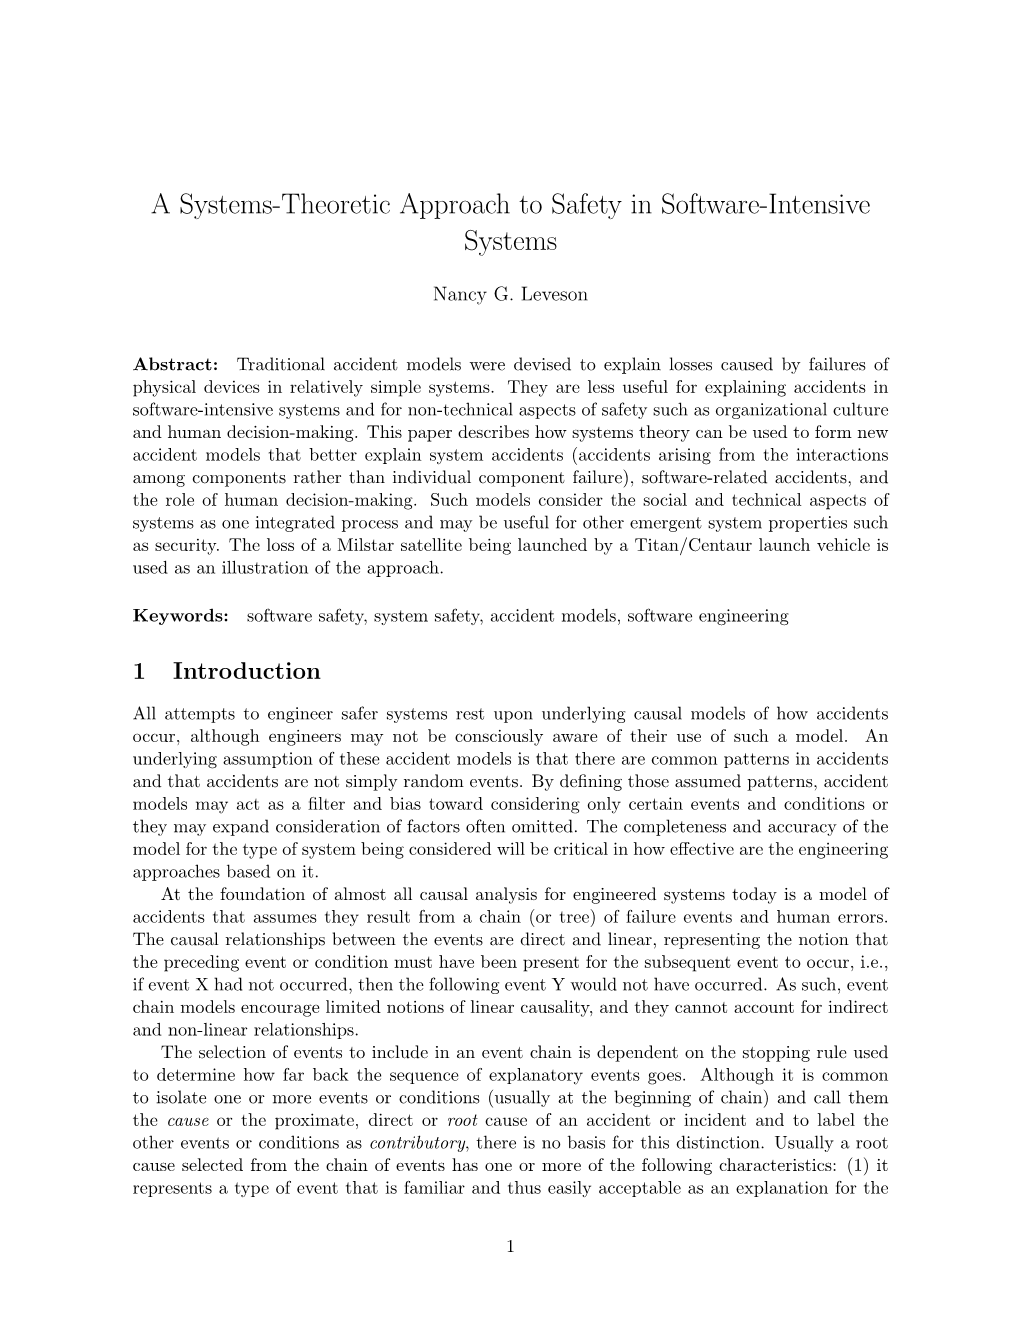 A Systems-Theoretic Approach to Safety in Software-Intensive Systems